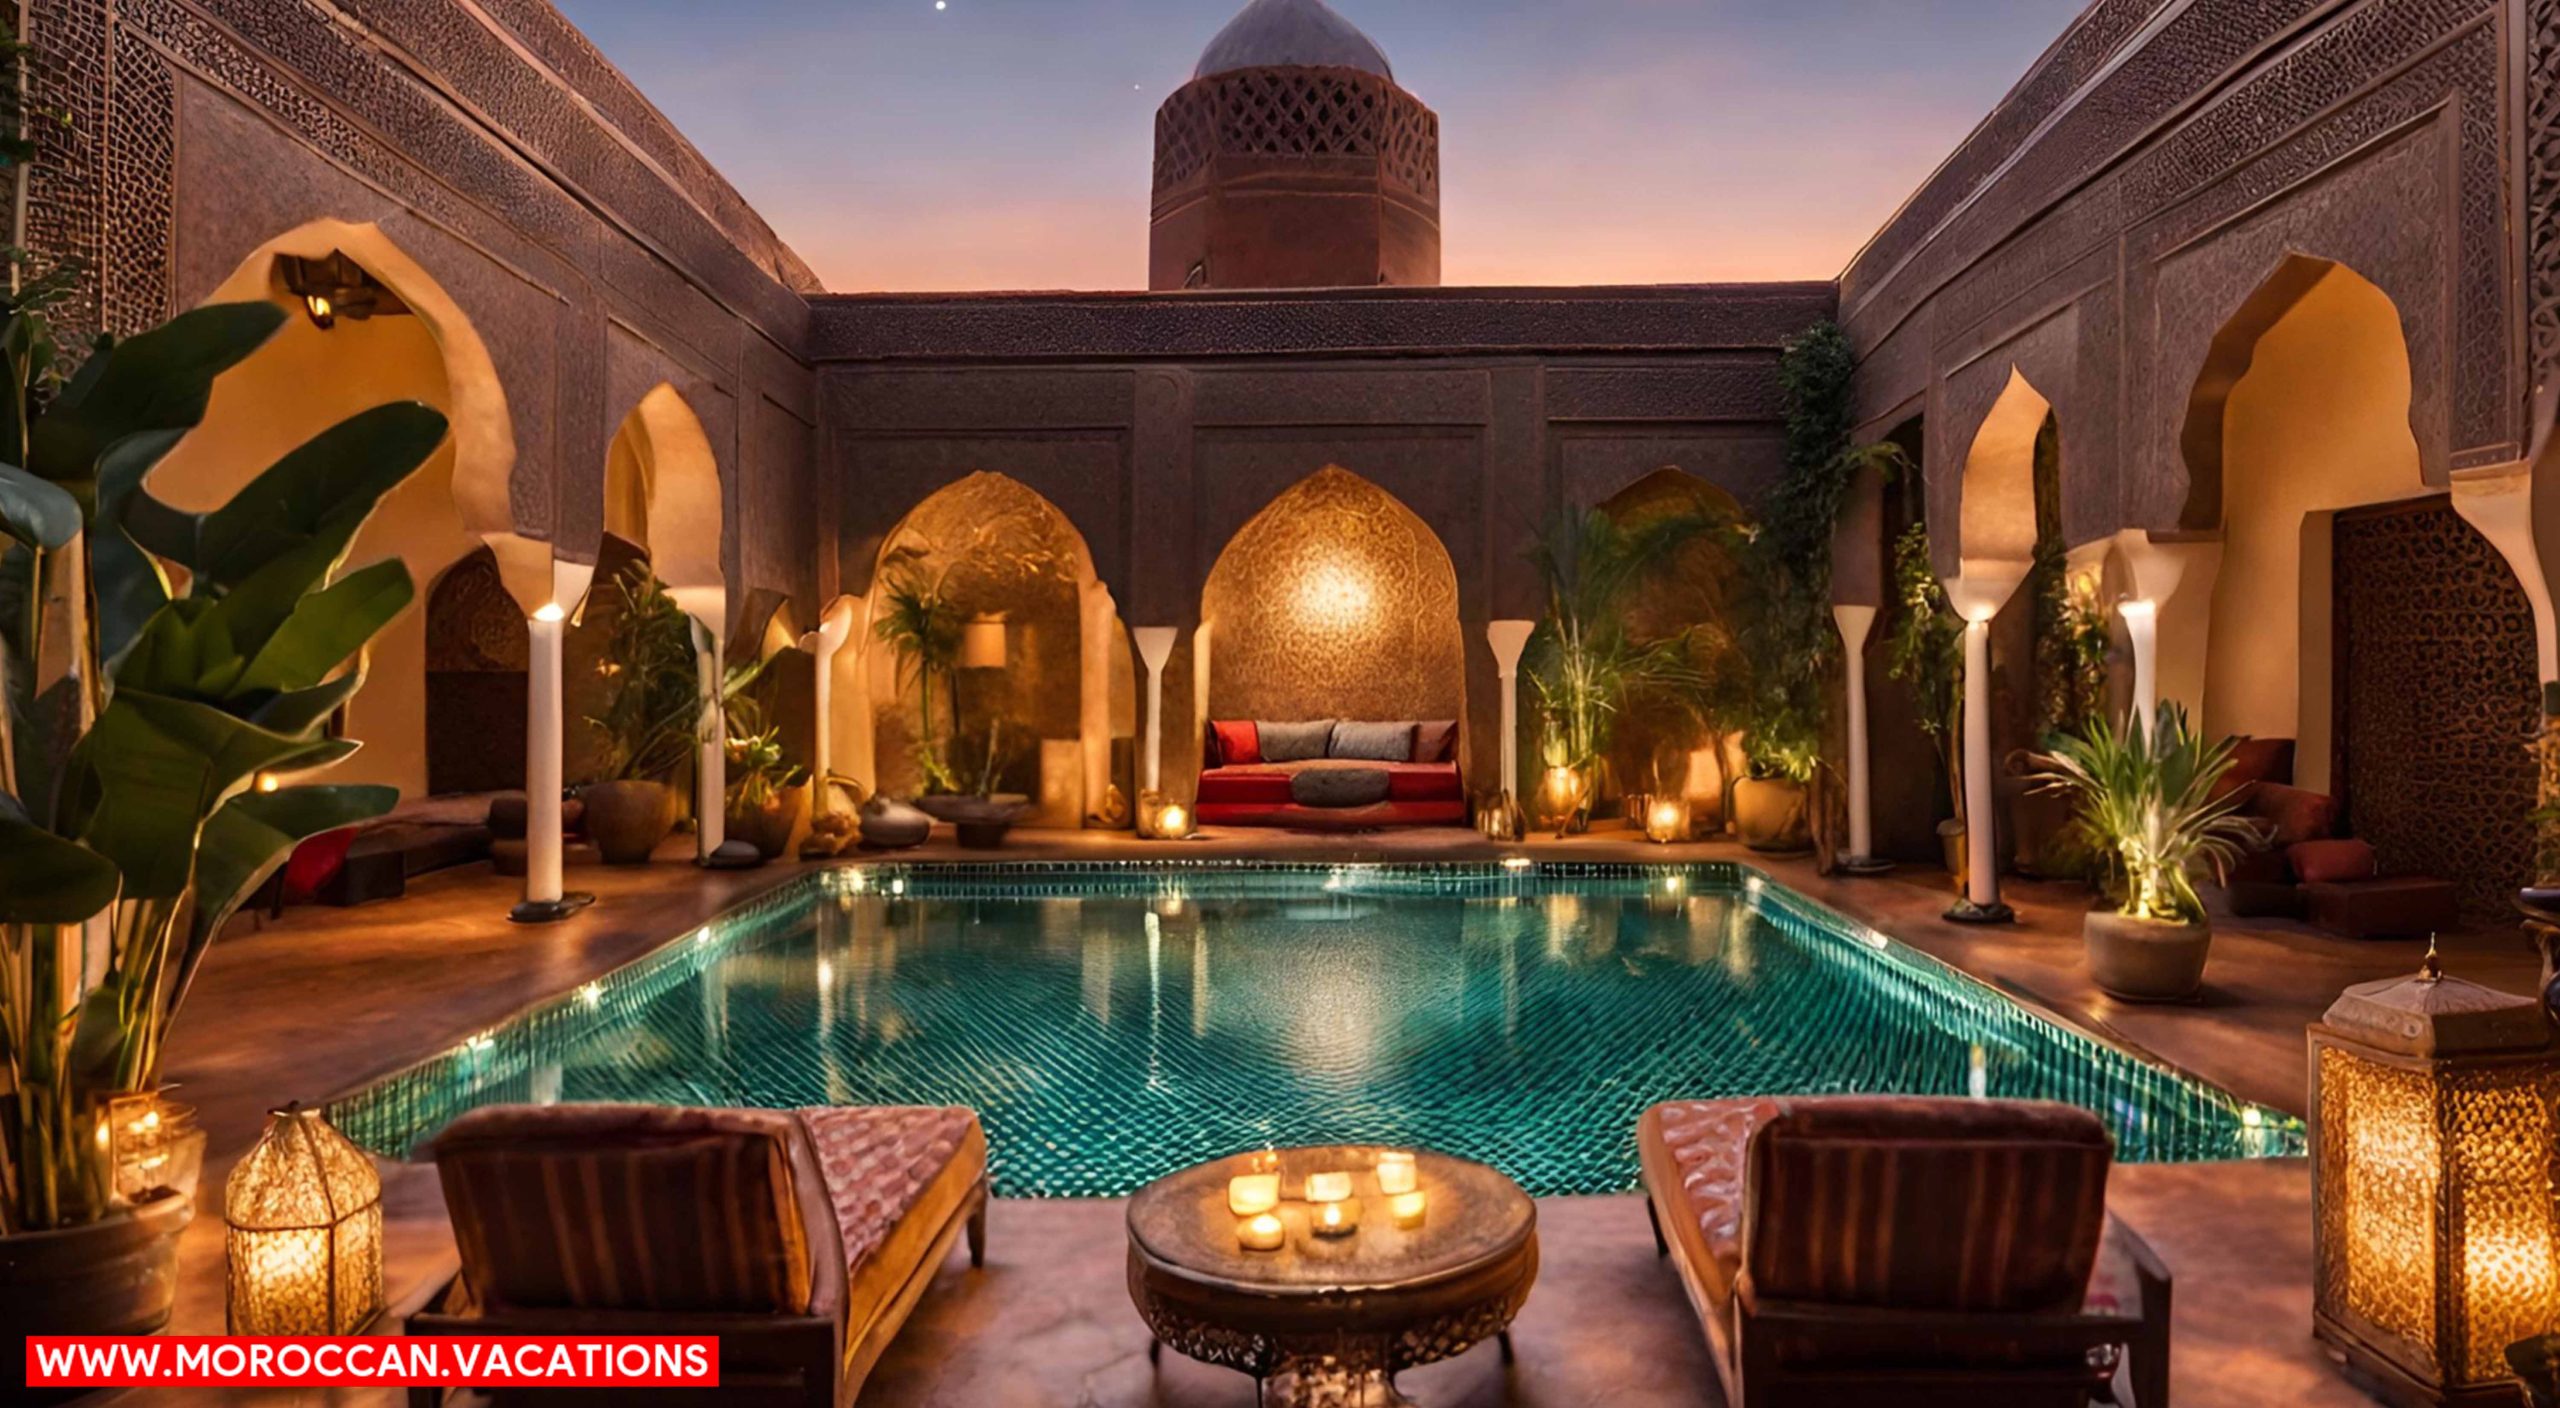 Opulent Moroccan Riad with intricate mosaics, plush furnishings, rooftop views of Marrakesh.